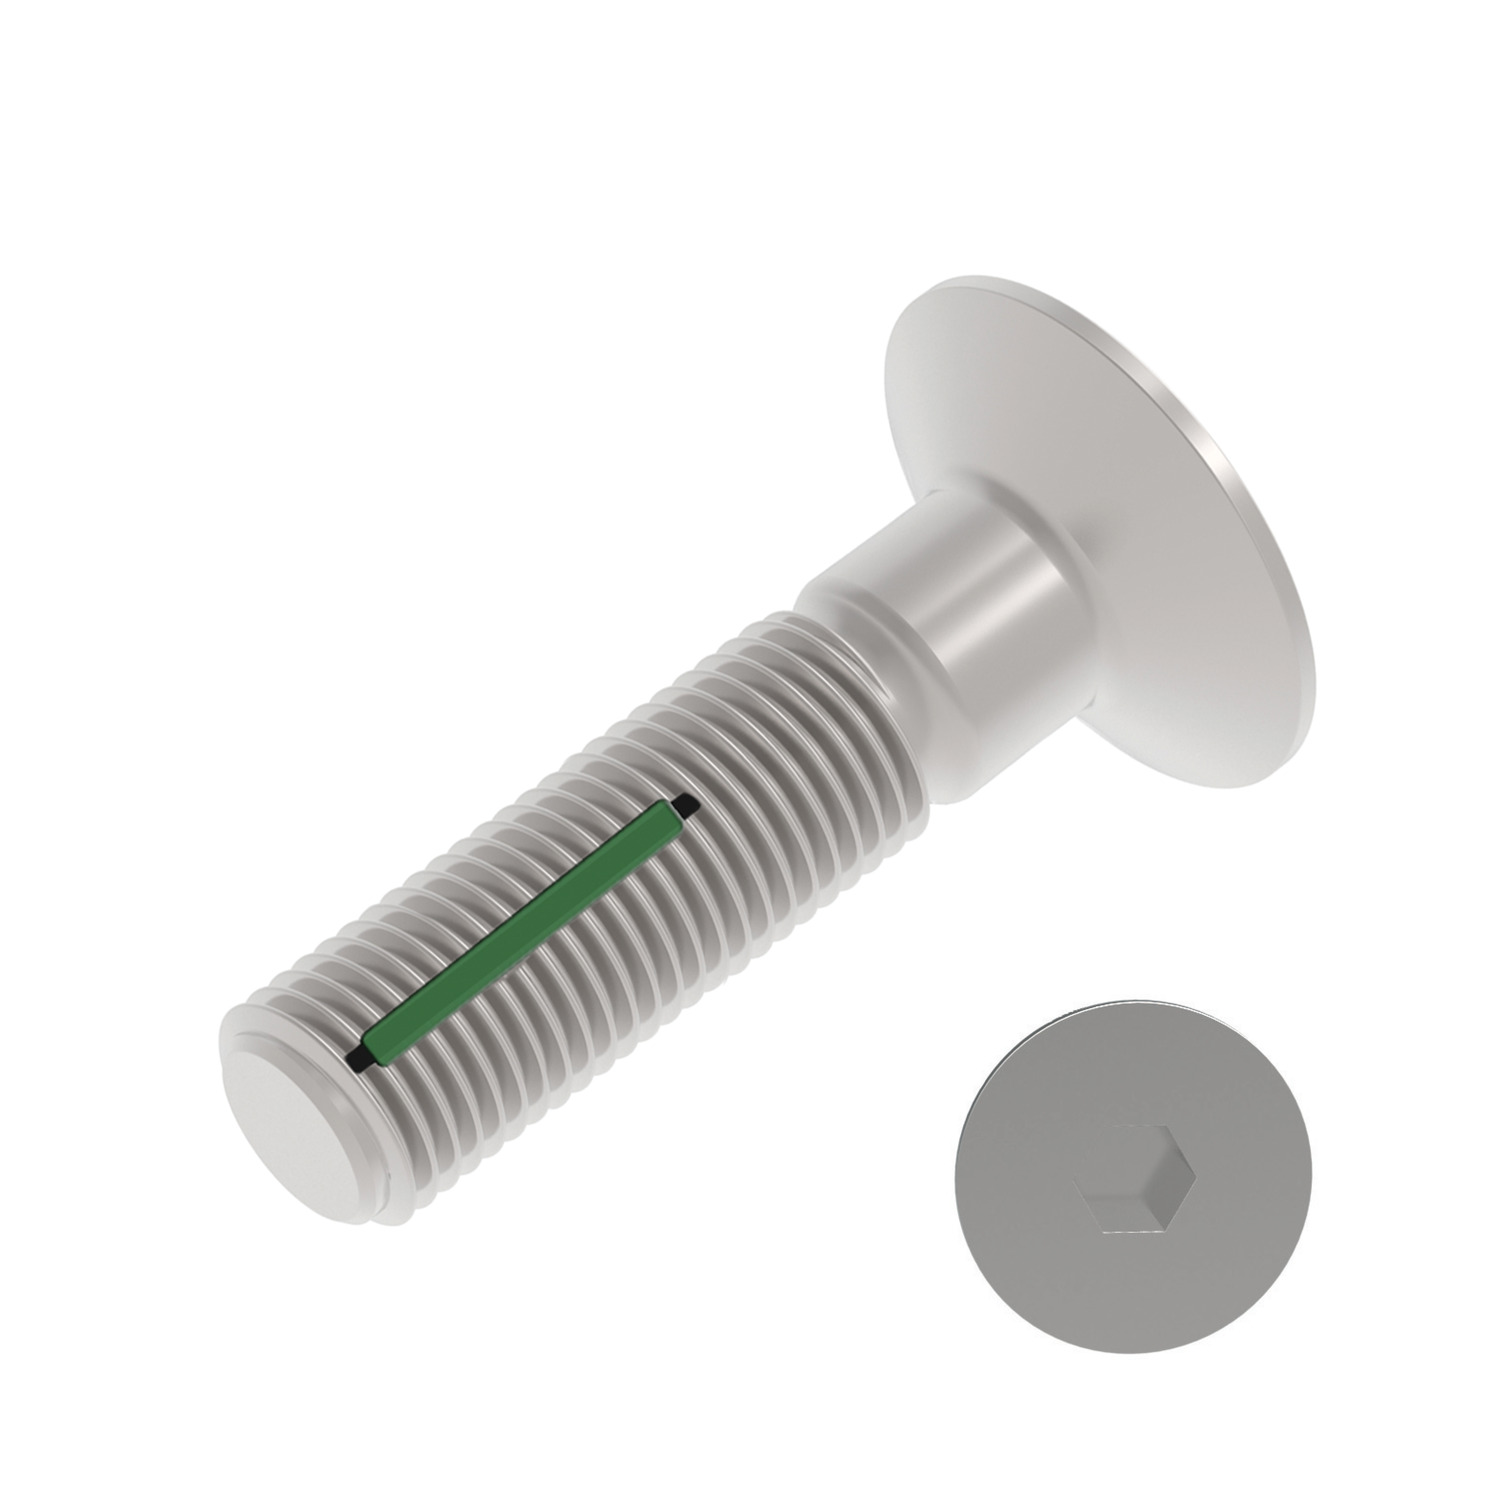 Self-Locking Countersunk Screws Vibration proof. Standard green locking patch. Breakaway torque values are complex and can be calculated on request.